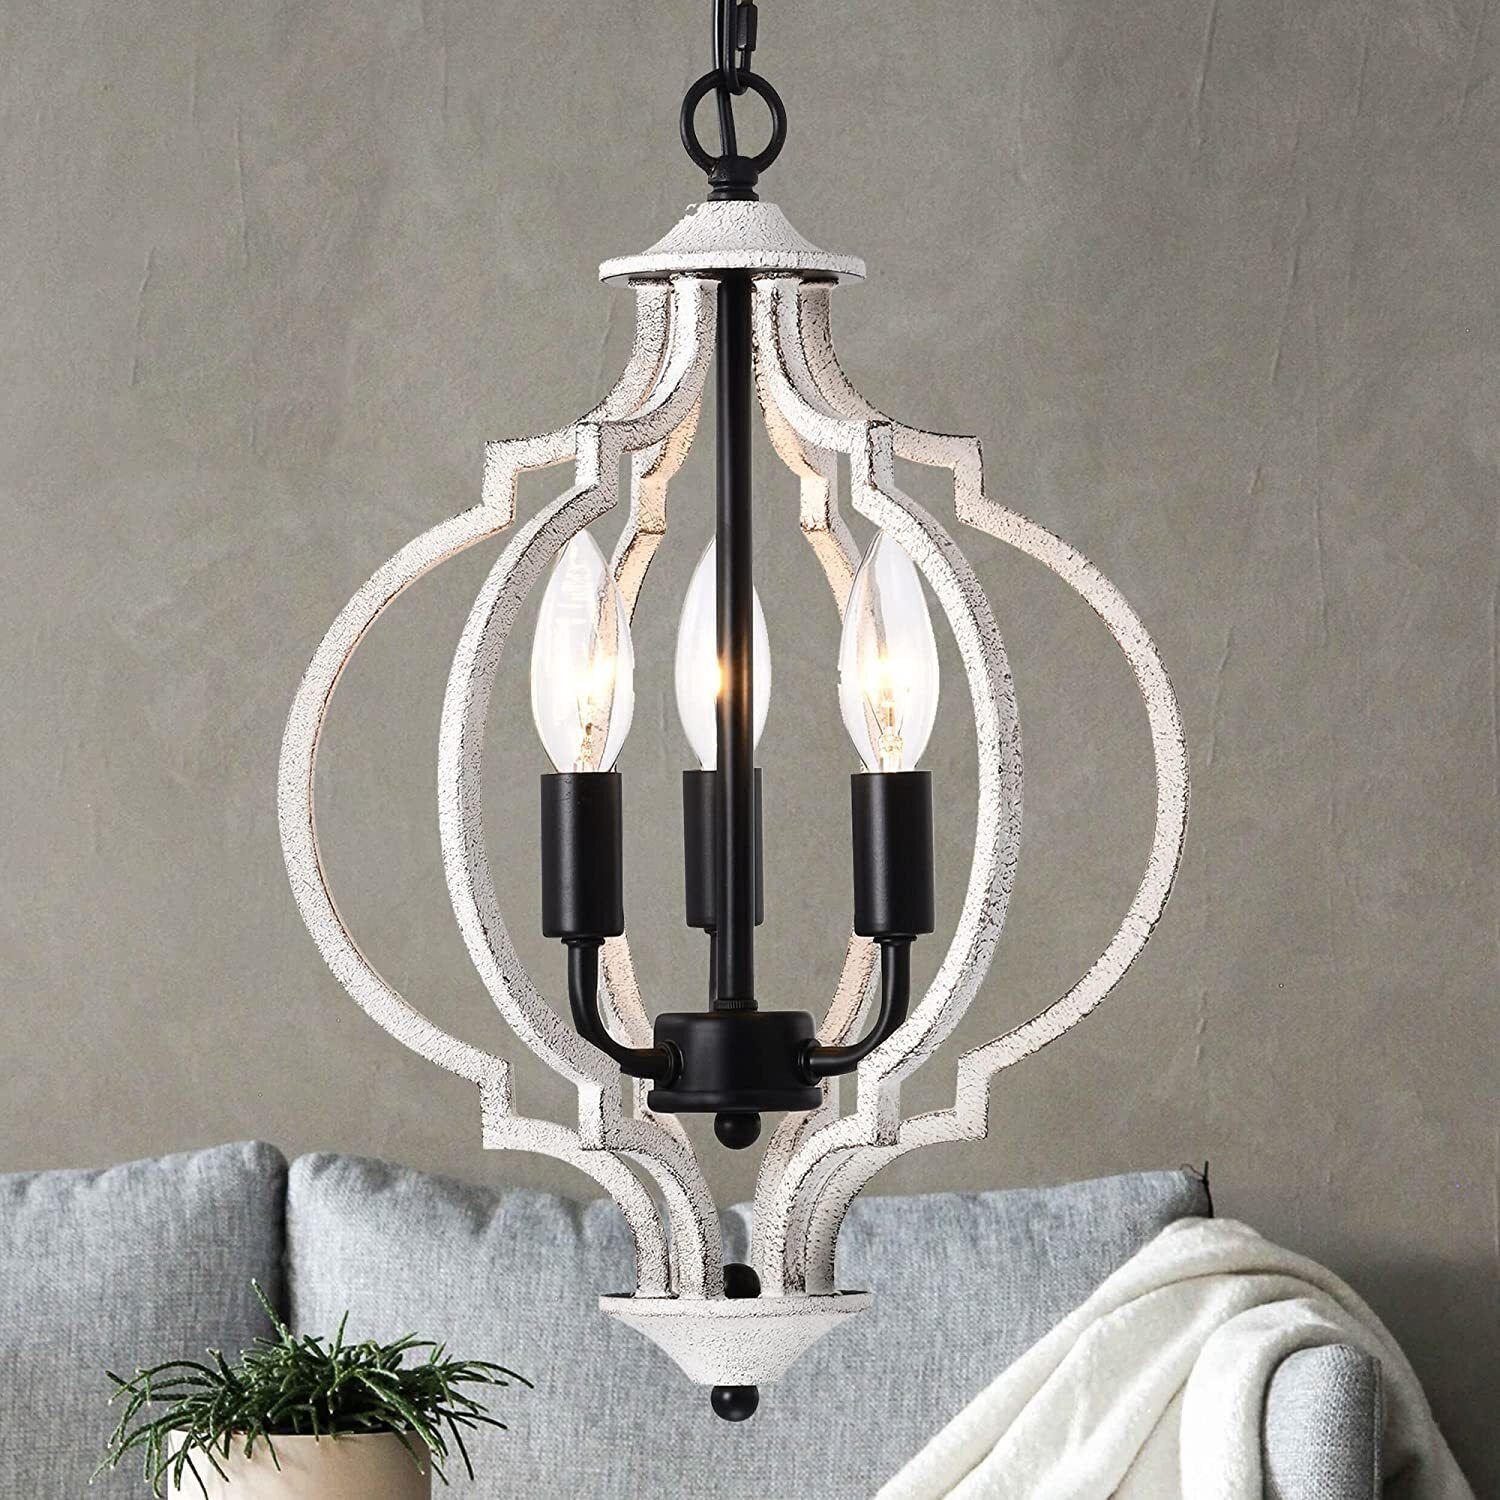 French Country Rustic Faux Candle Chandelier 